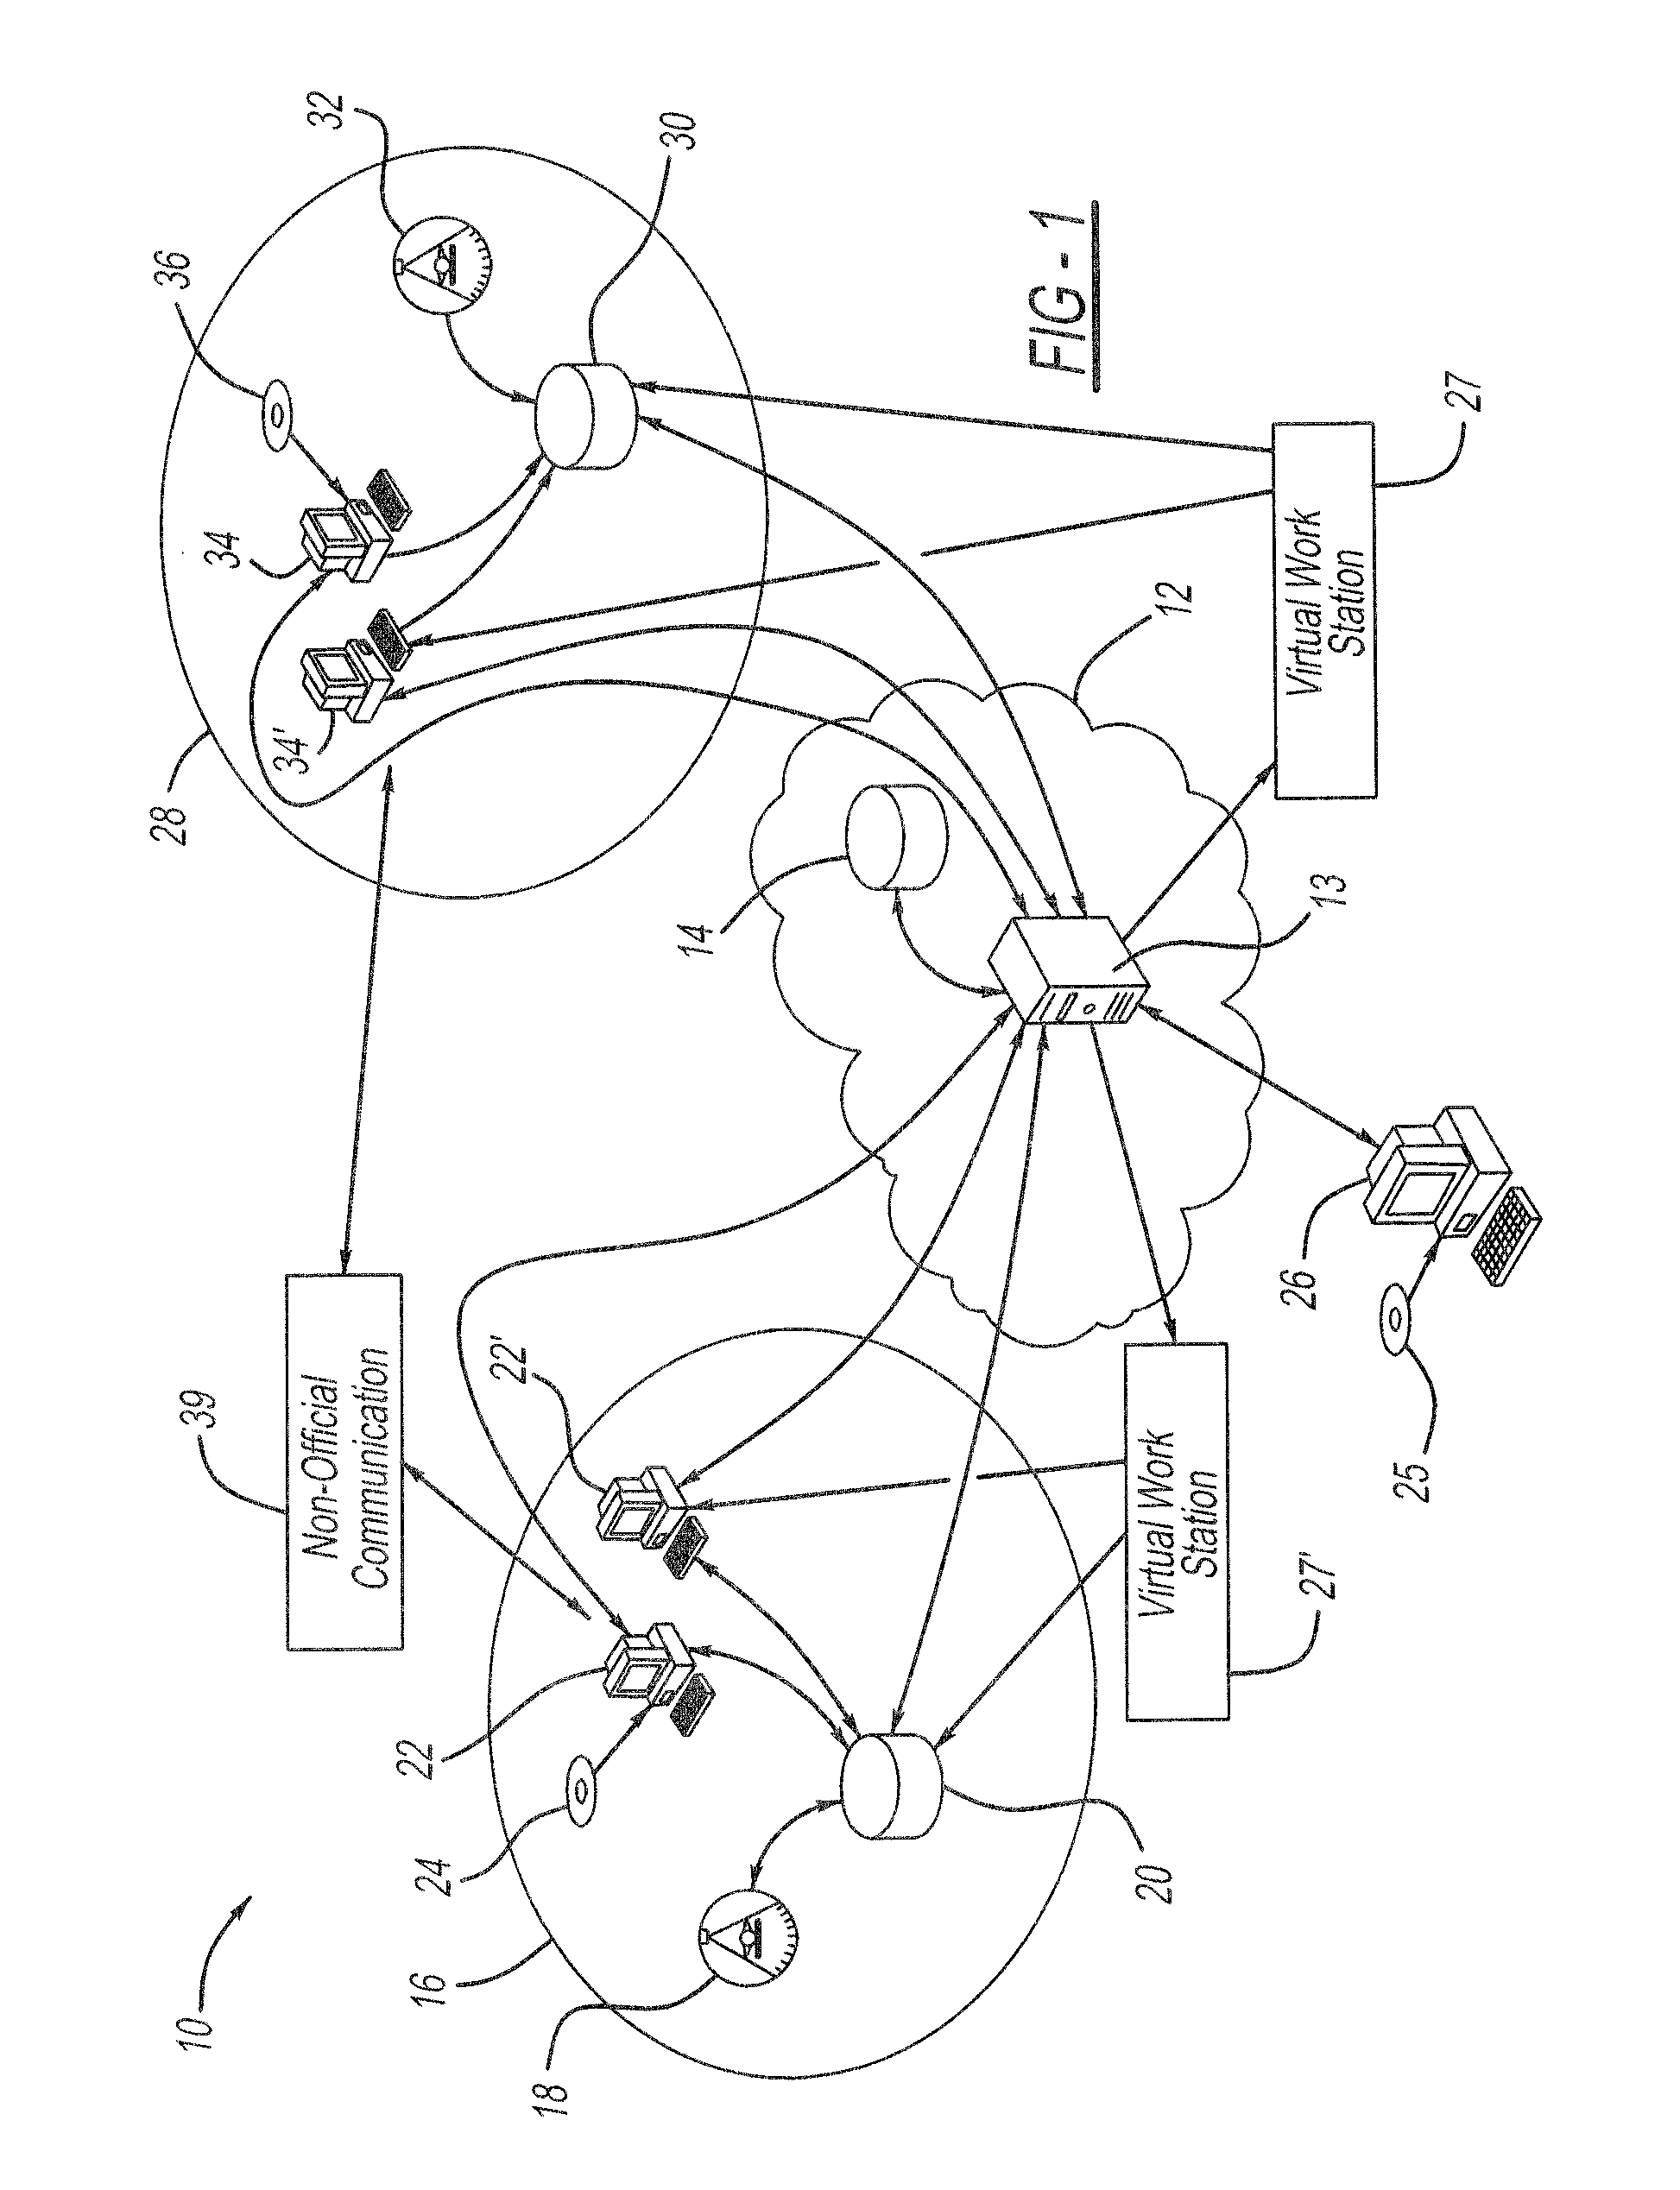 System combining automated searches of cloud-based radiologic images, accession number assignment, and interfacility peer review